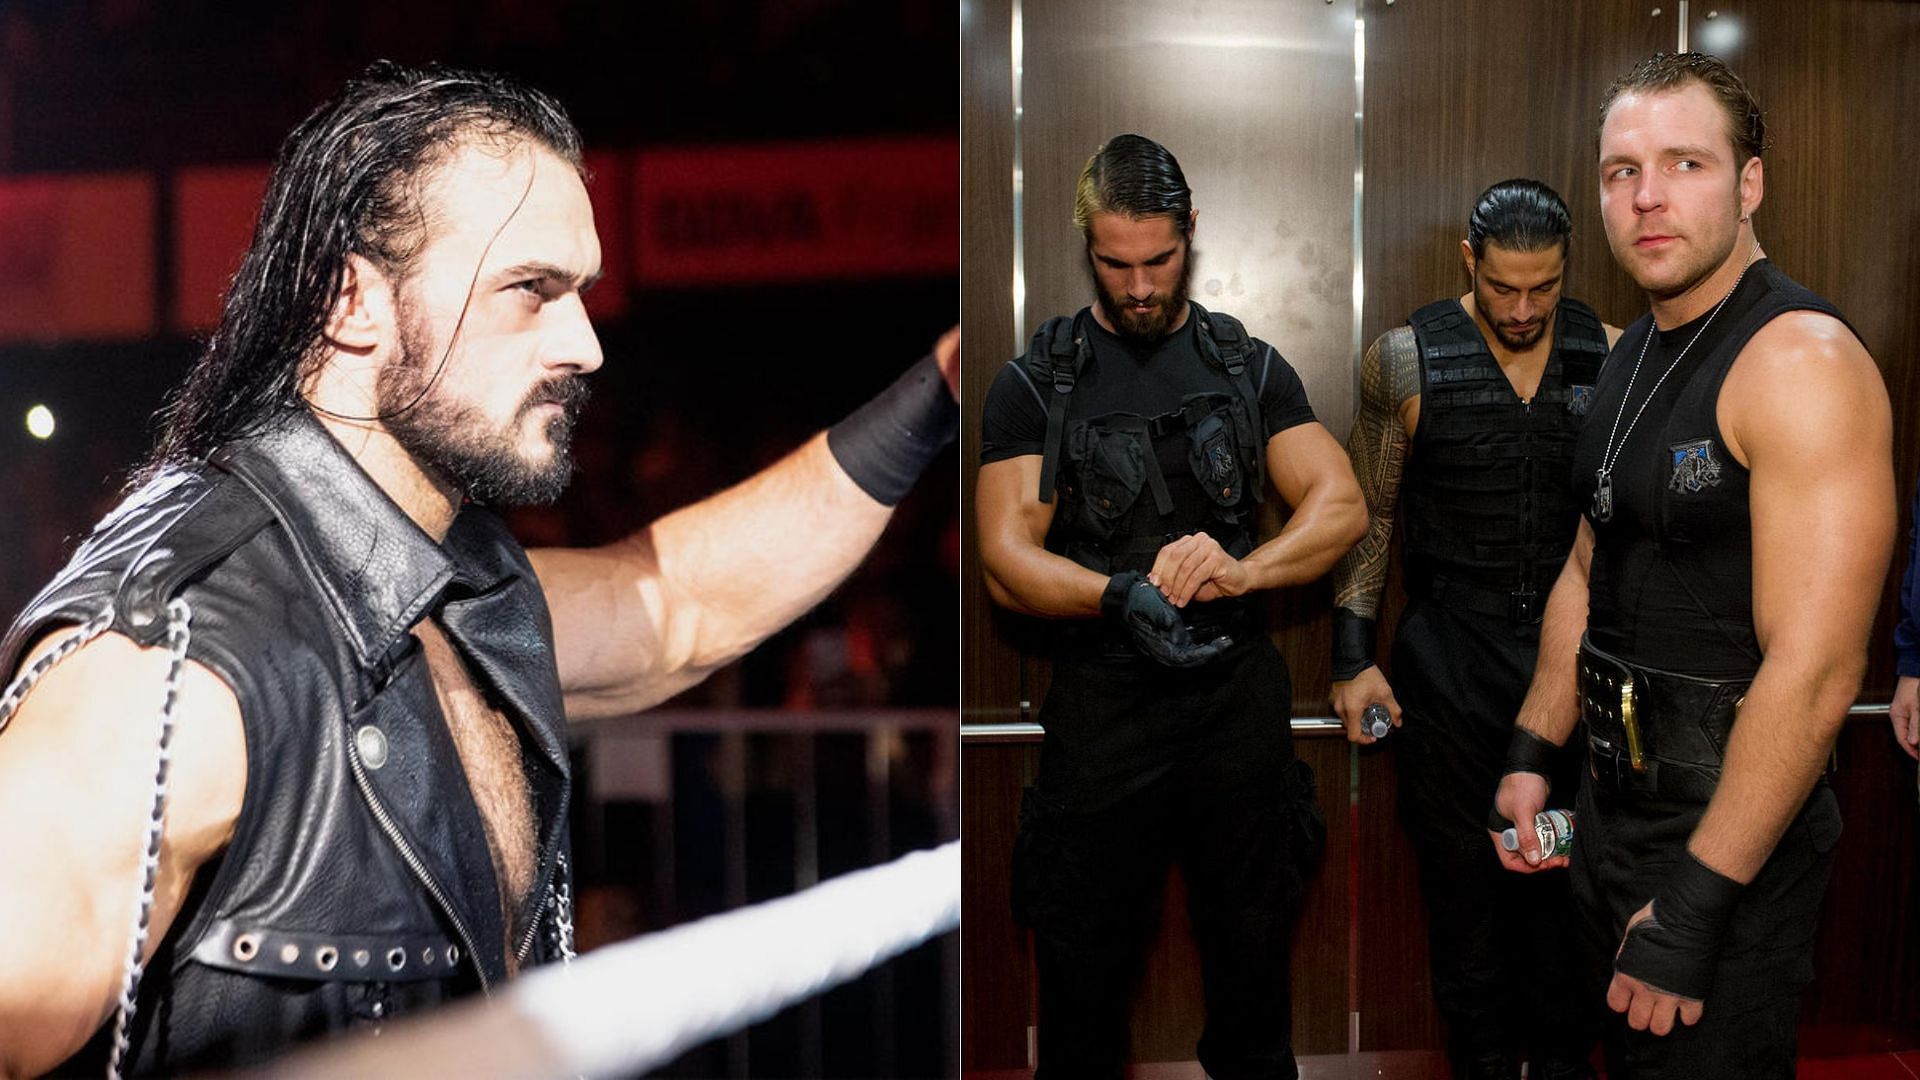 Drew McIntyre (left); Seth Rollins, Roman Reigns, and Dean Ambrose (right)